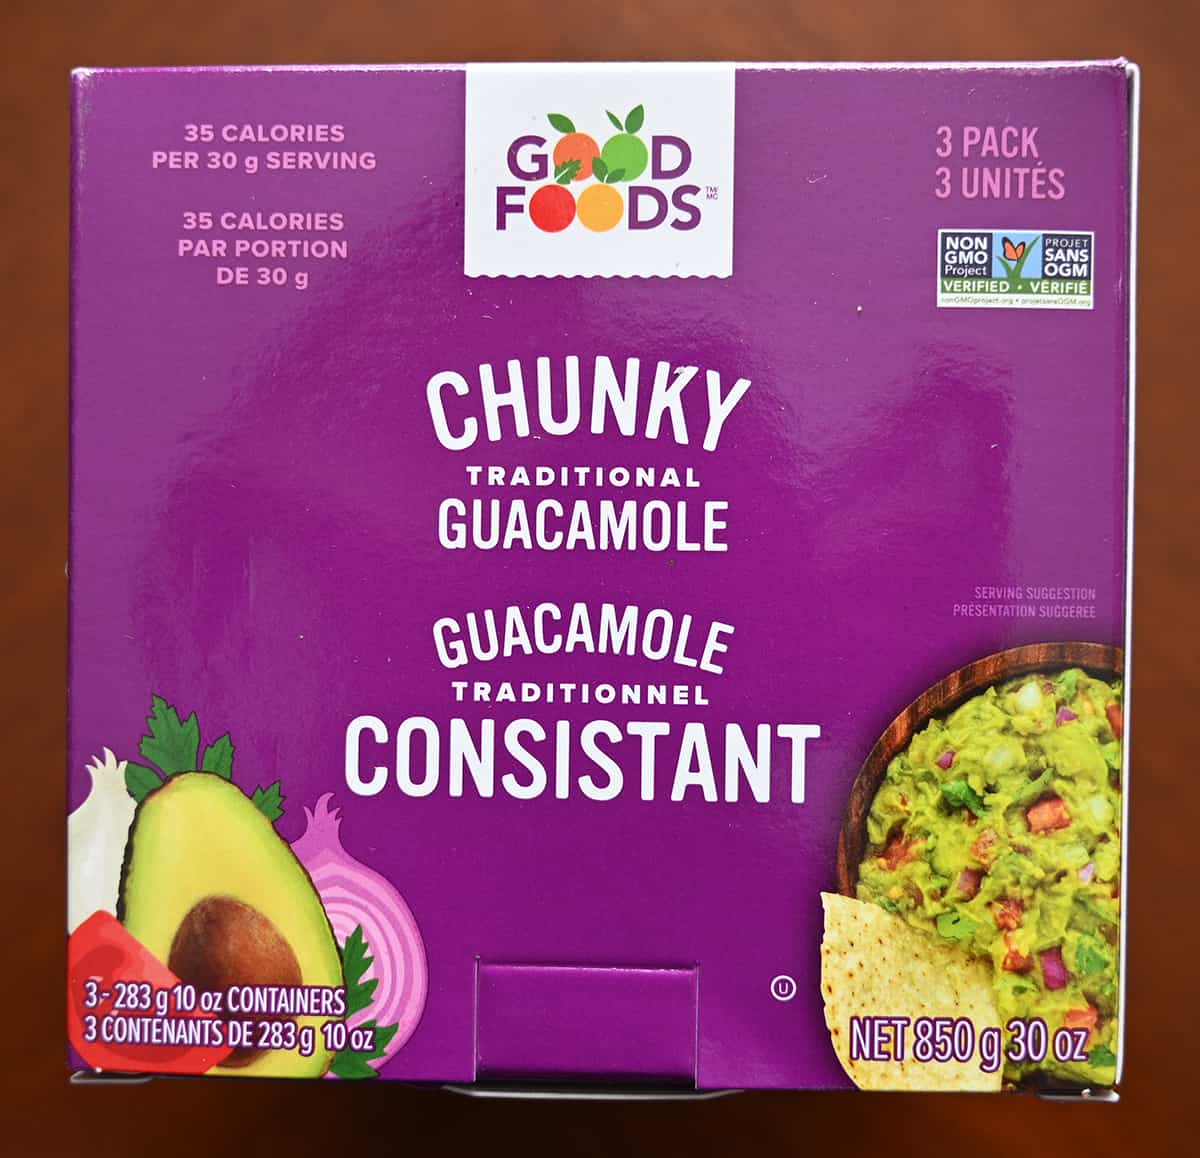 Image of the label on the guacamole pack showing the weight of the three containers and that it's non GMO verified.